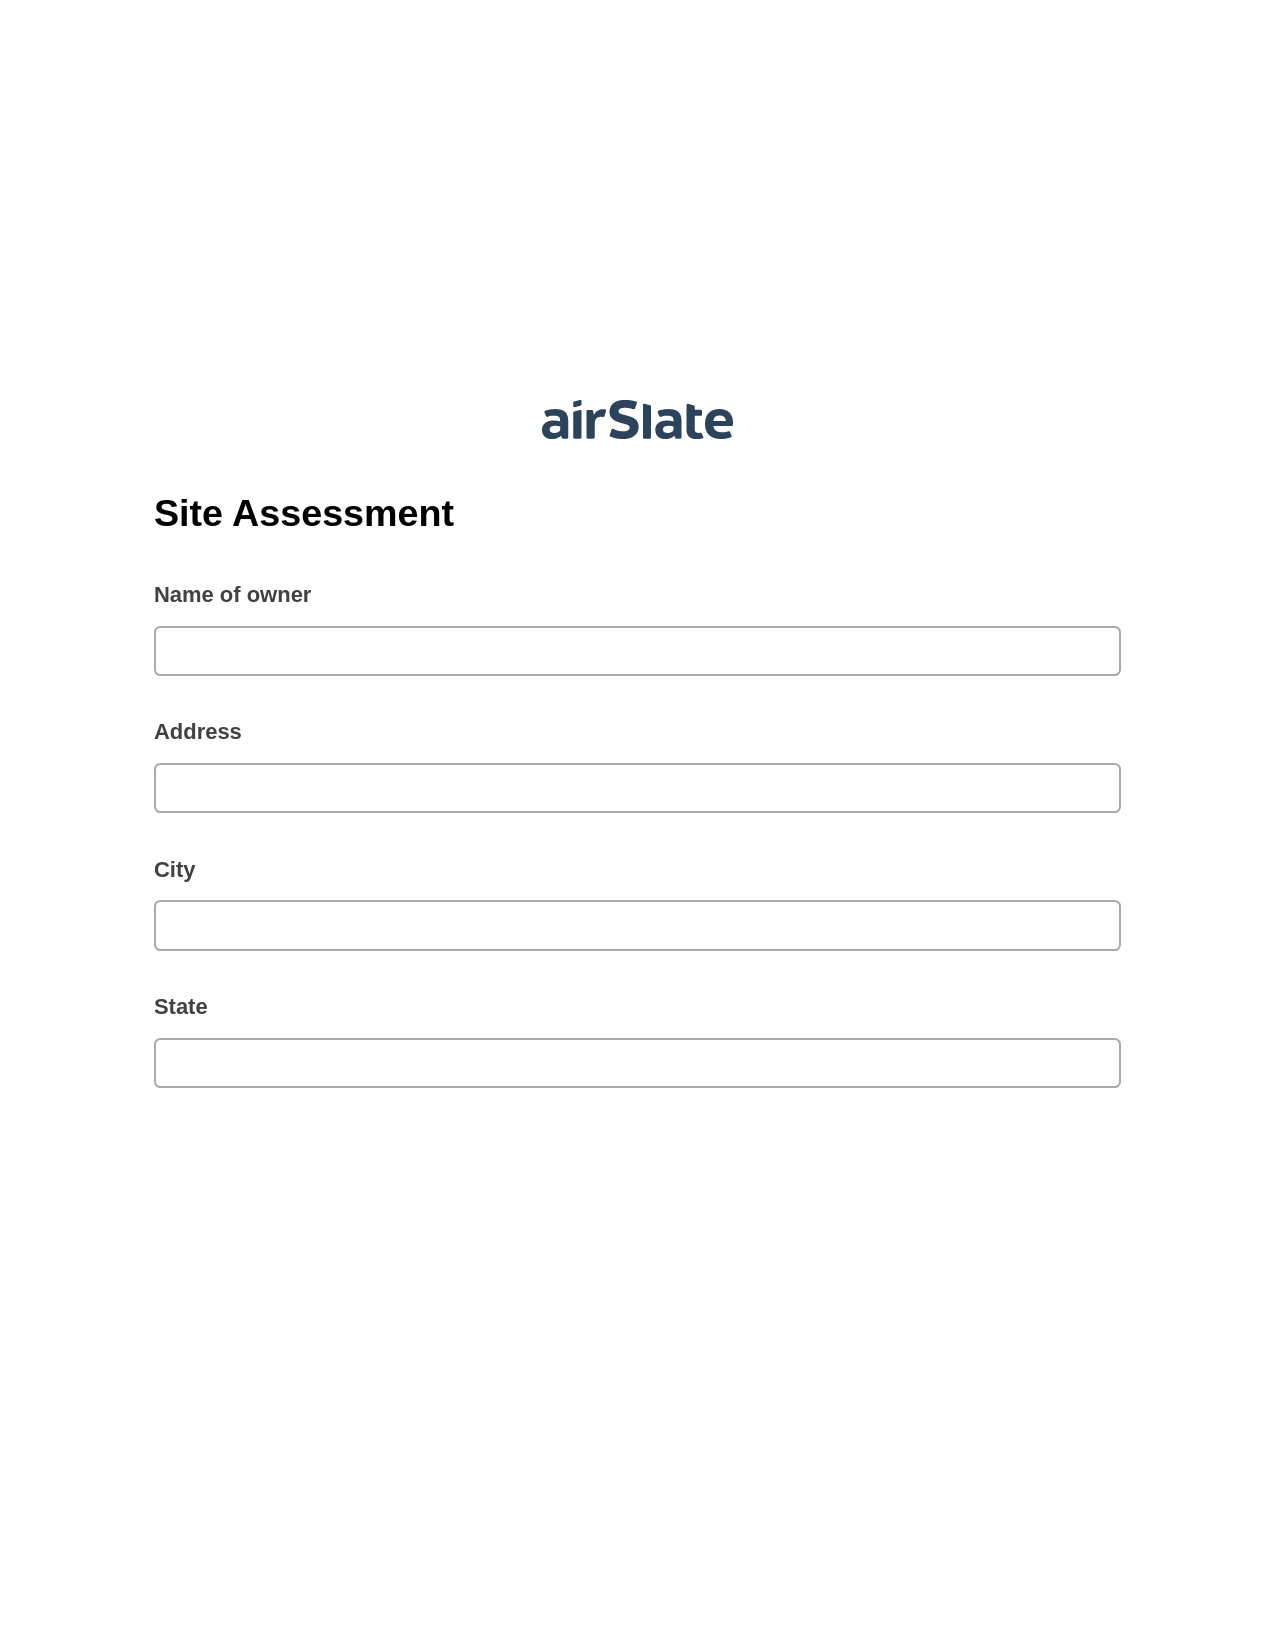 Site Assessment Pre-fill from Excel Spreadsheet Bot, Create Salesforce Record Bot, Export to Excel 365 Bot